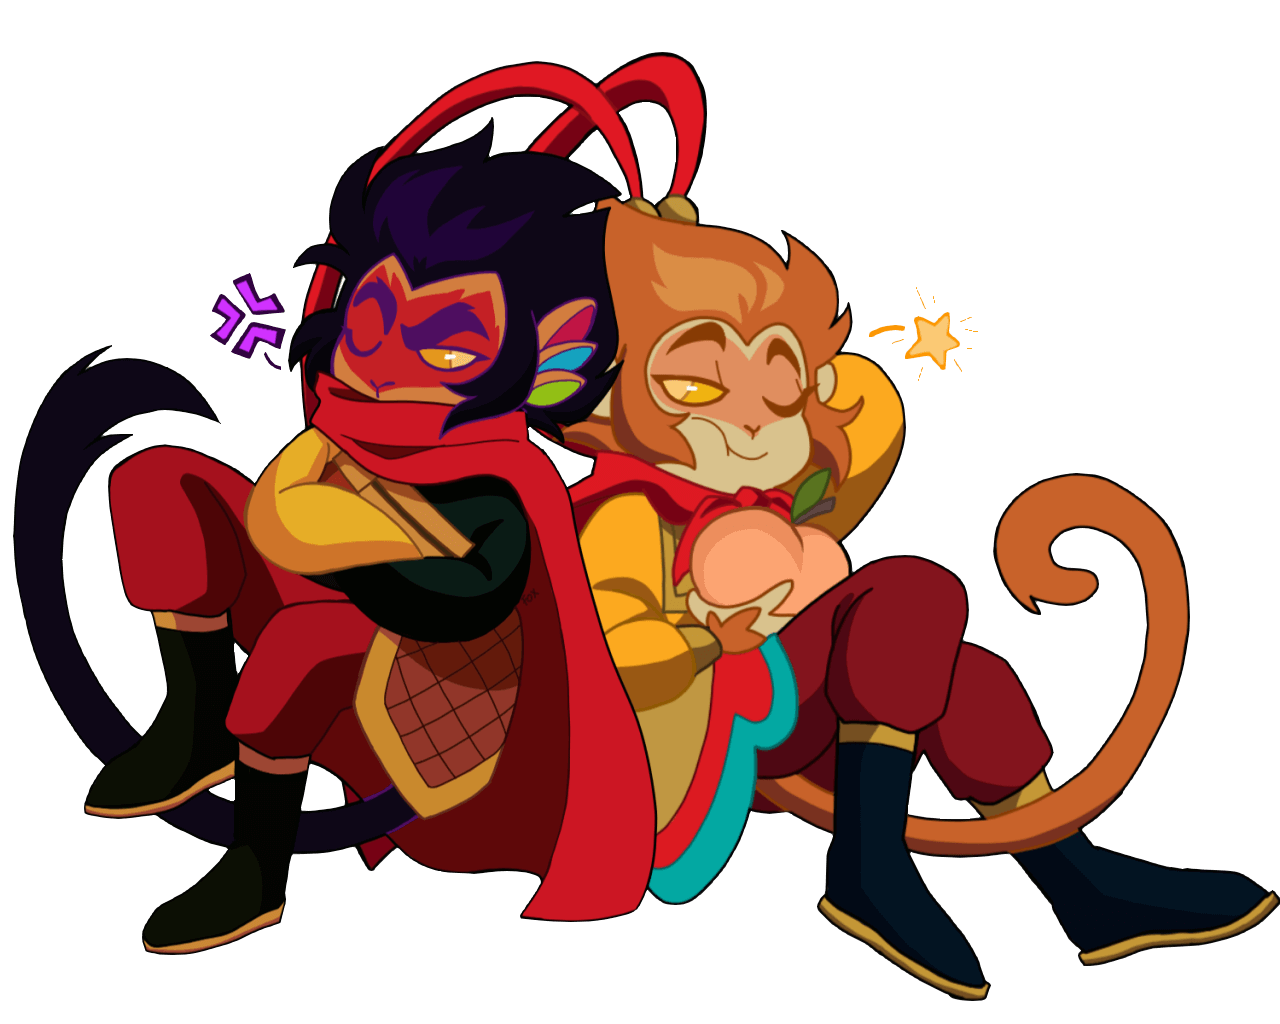 Fanart of Sun Wukong and Macaque from LEGO Monkie Kid leaning into each other. Wukong is eating a peach and Macaque is grumpy.